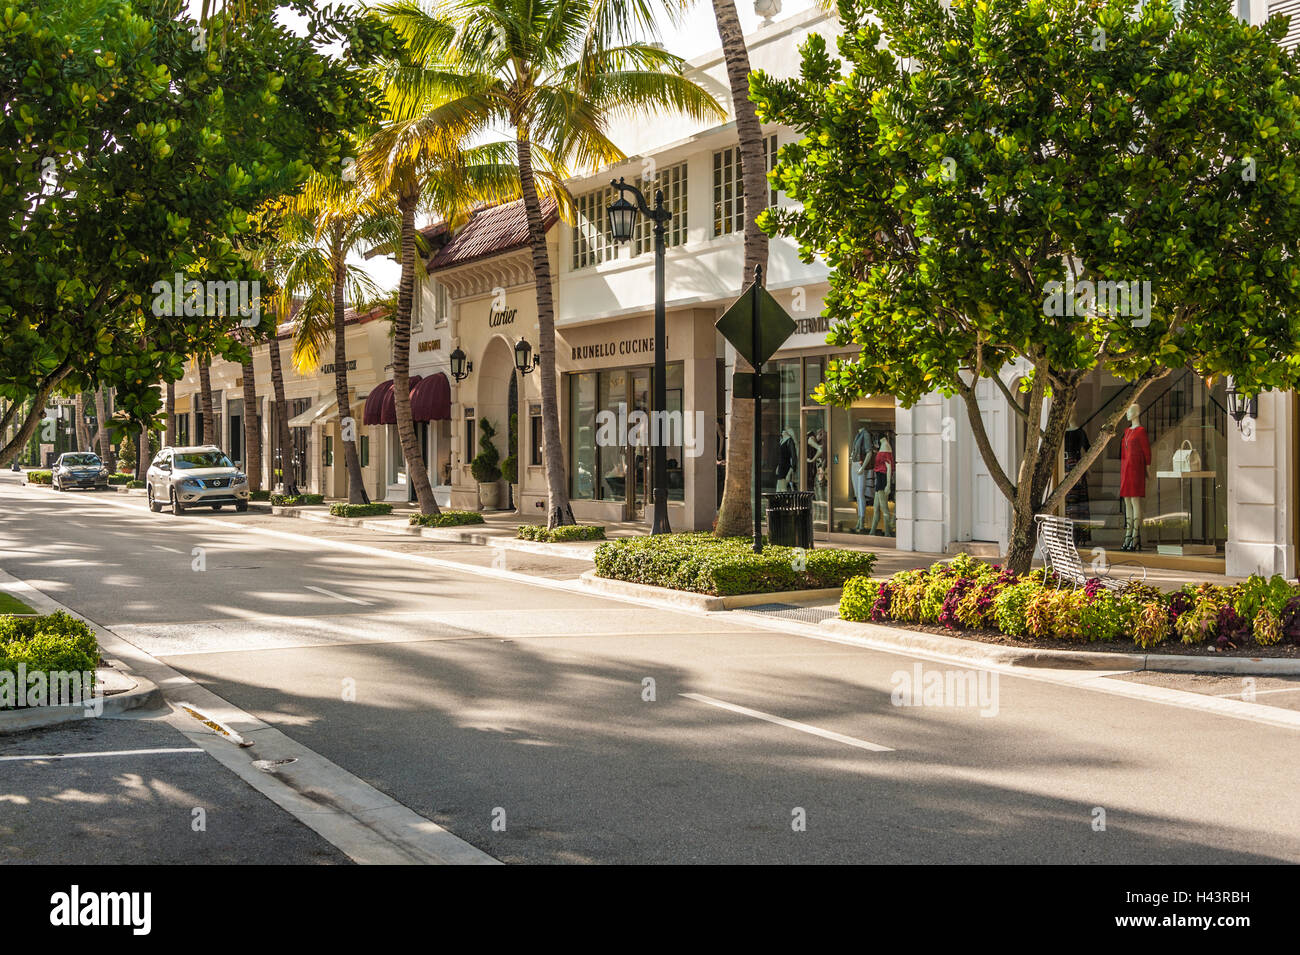 Worth avenue palm beach florida hi-res stock photography and